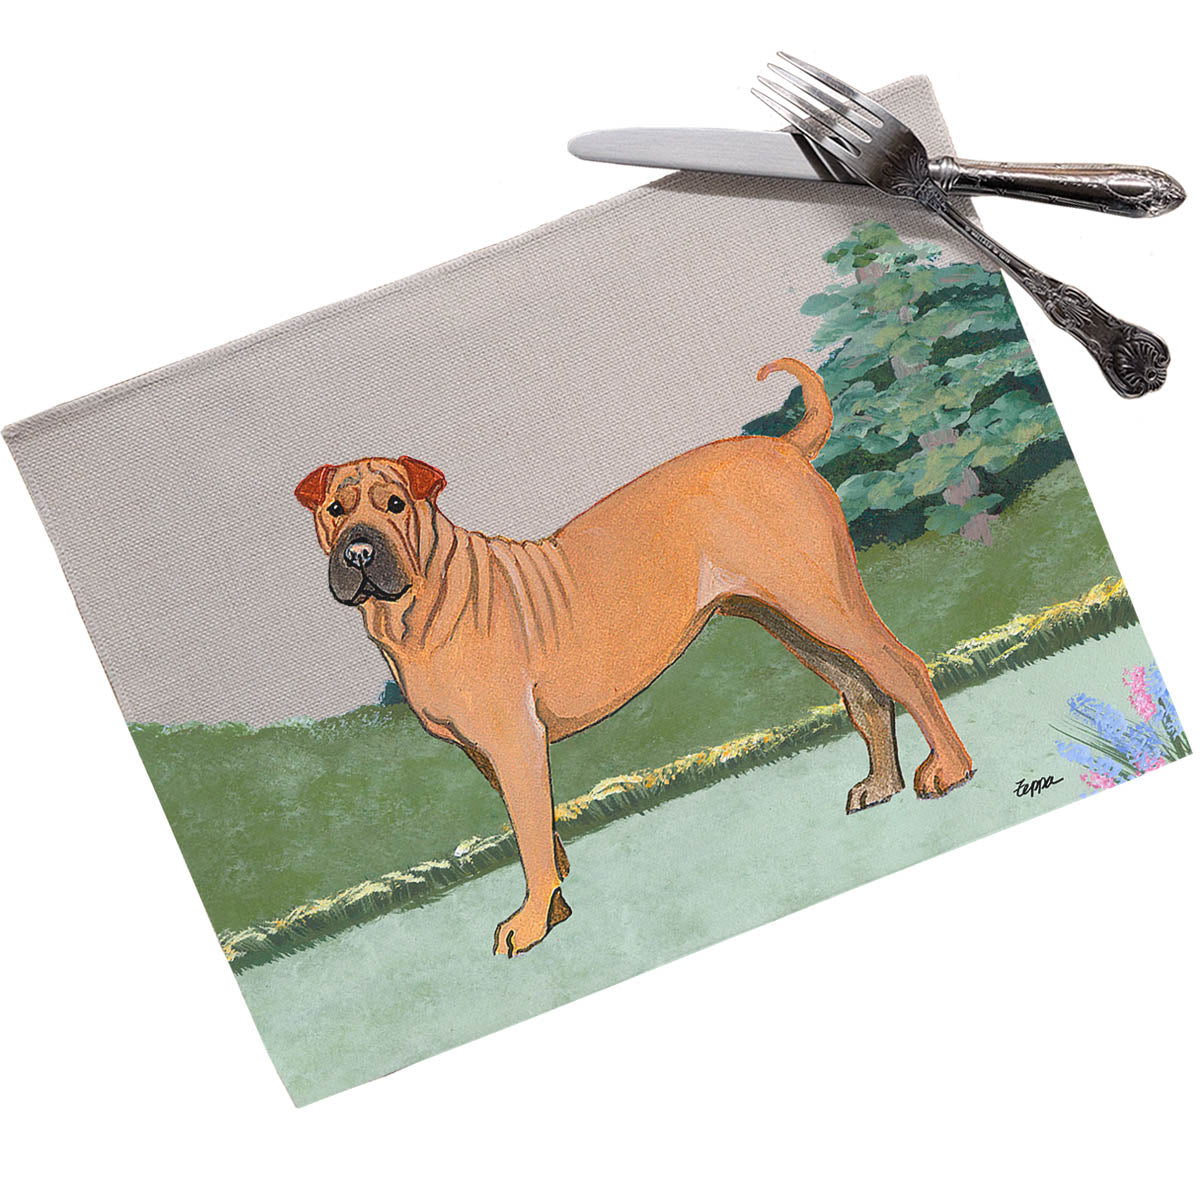 Shar-Pei Scenic Placemats